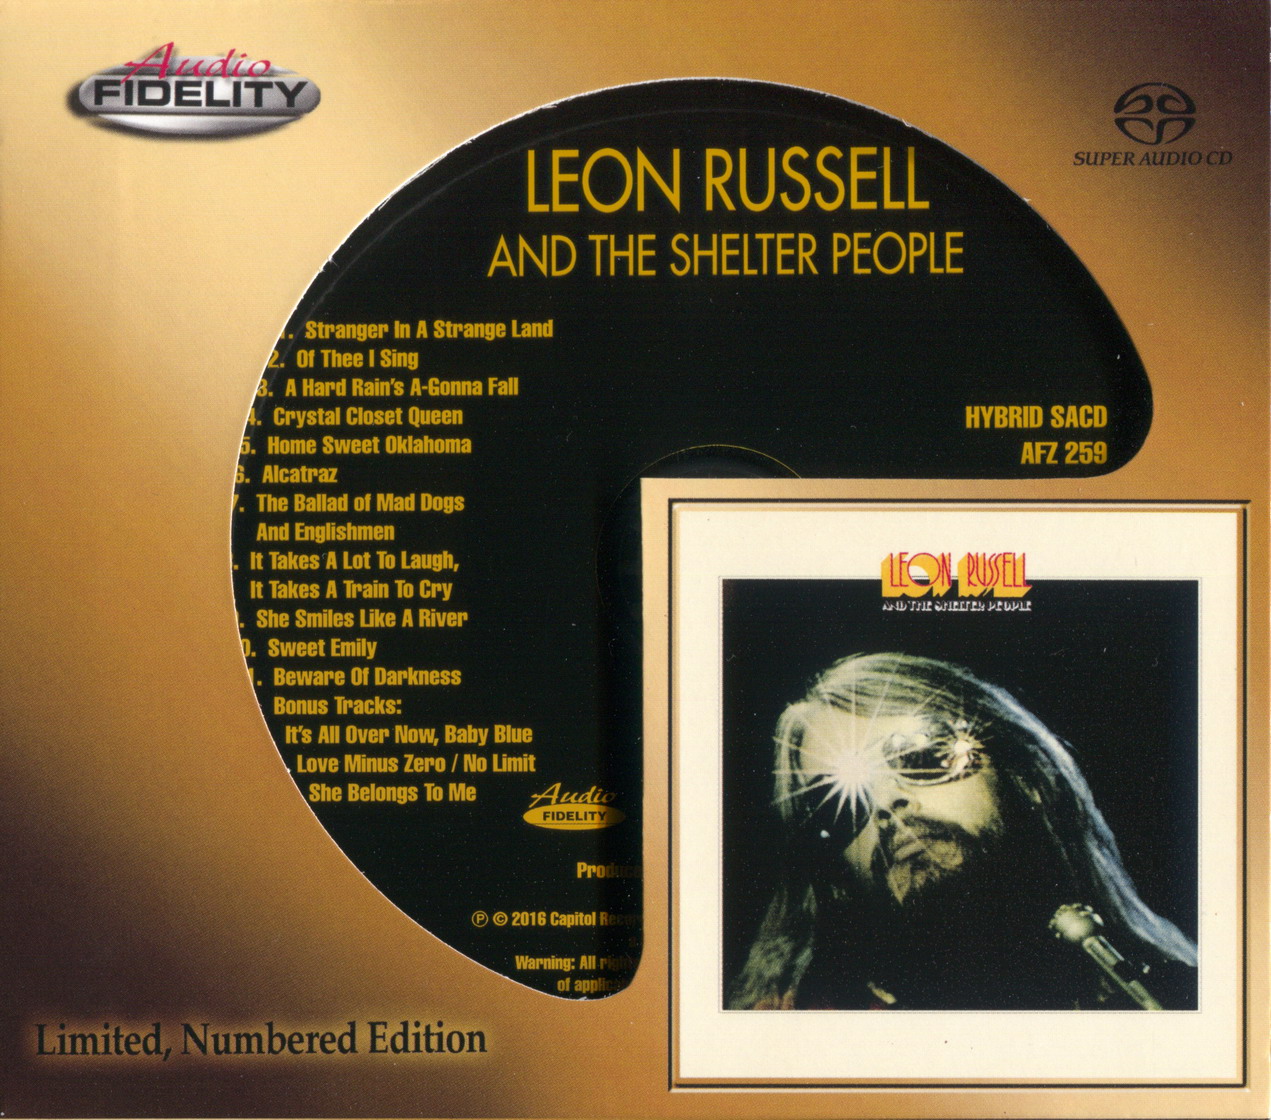 Leon Russell - Leon Russell And The Shelter People (1971) [Audio Fidelity 2016] SACD ISO